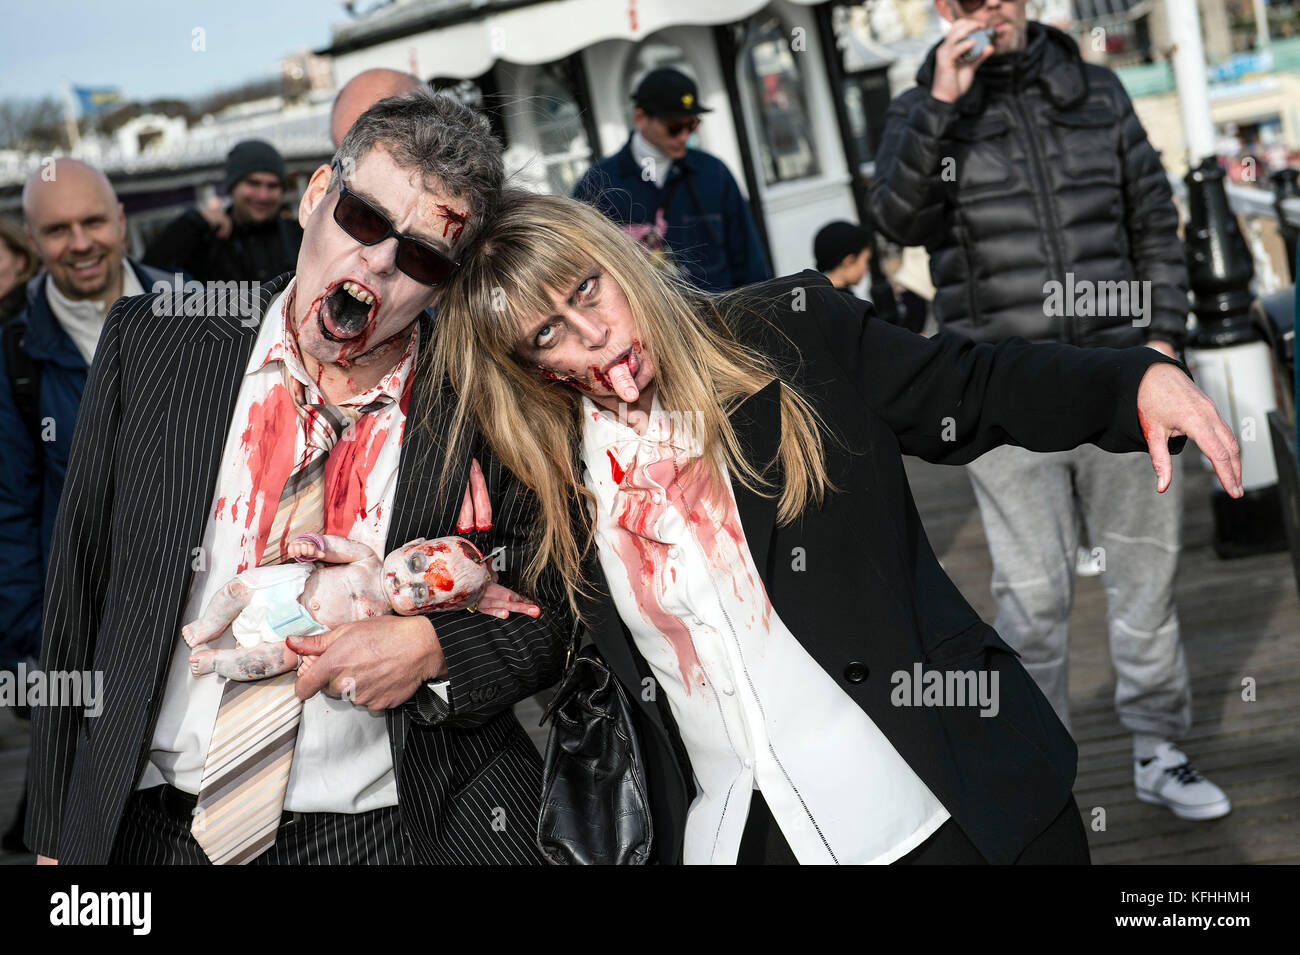 Brighton Zombie Walk High Resolution Stock Photography and Images - Alamy